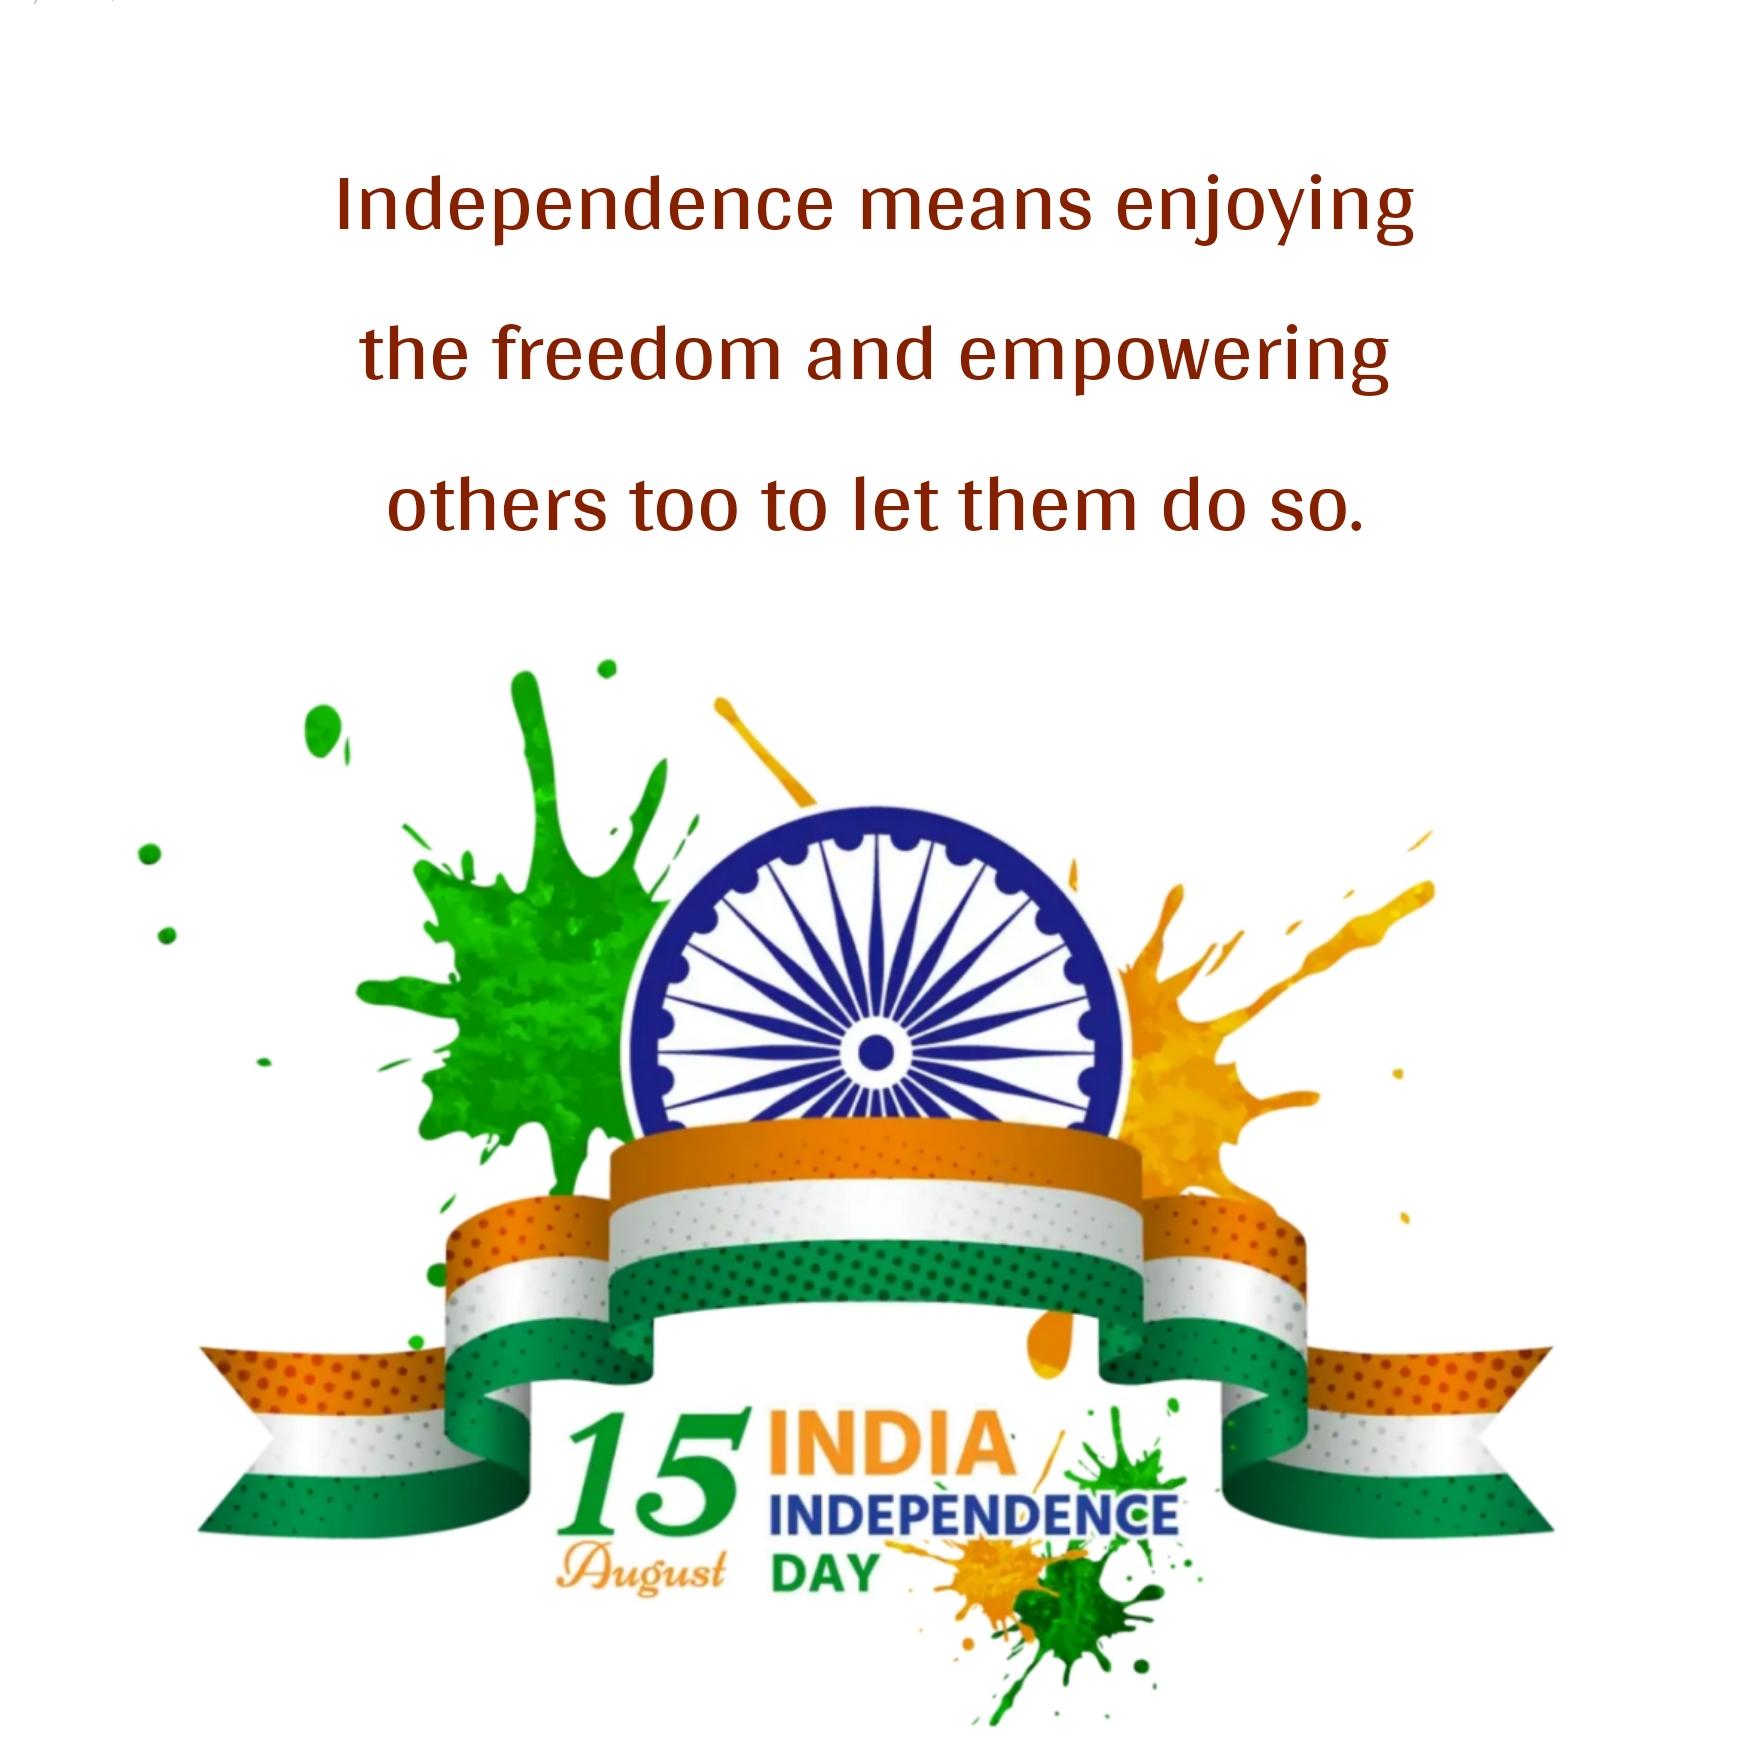 Independence means enjoying the freedom and empowering others too